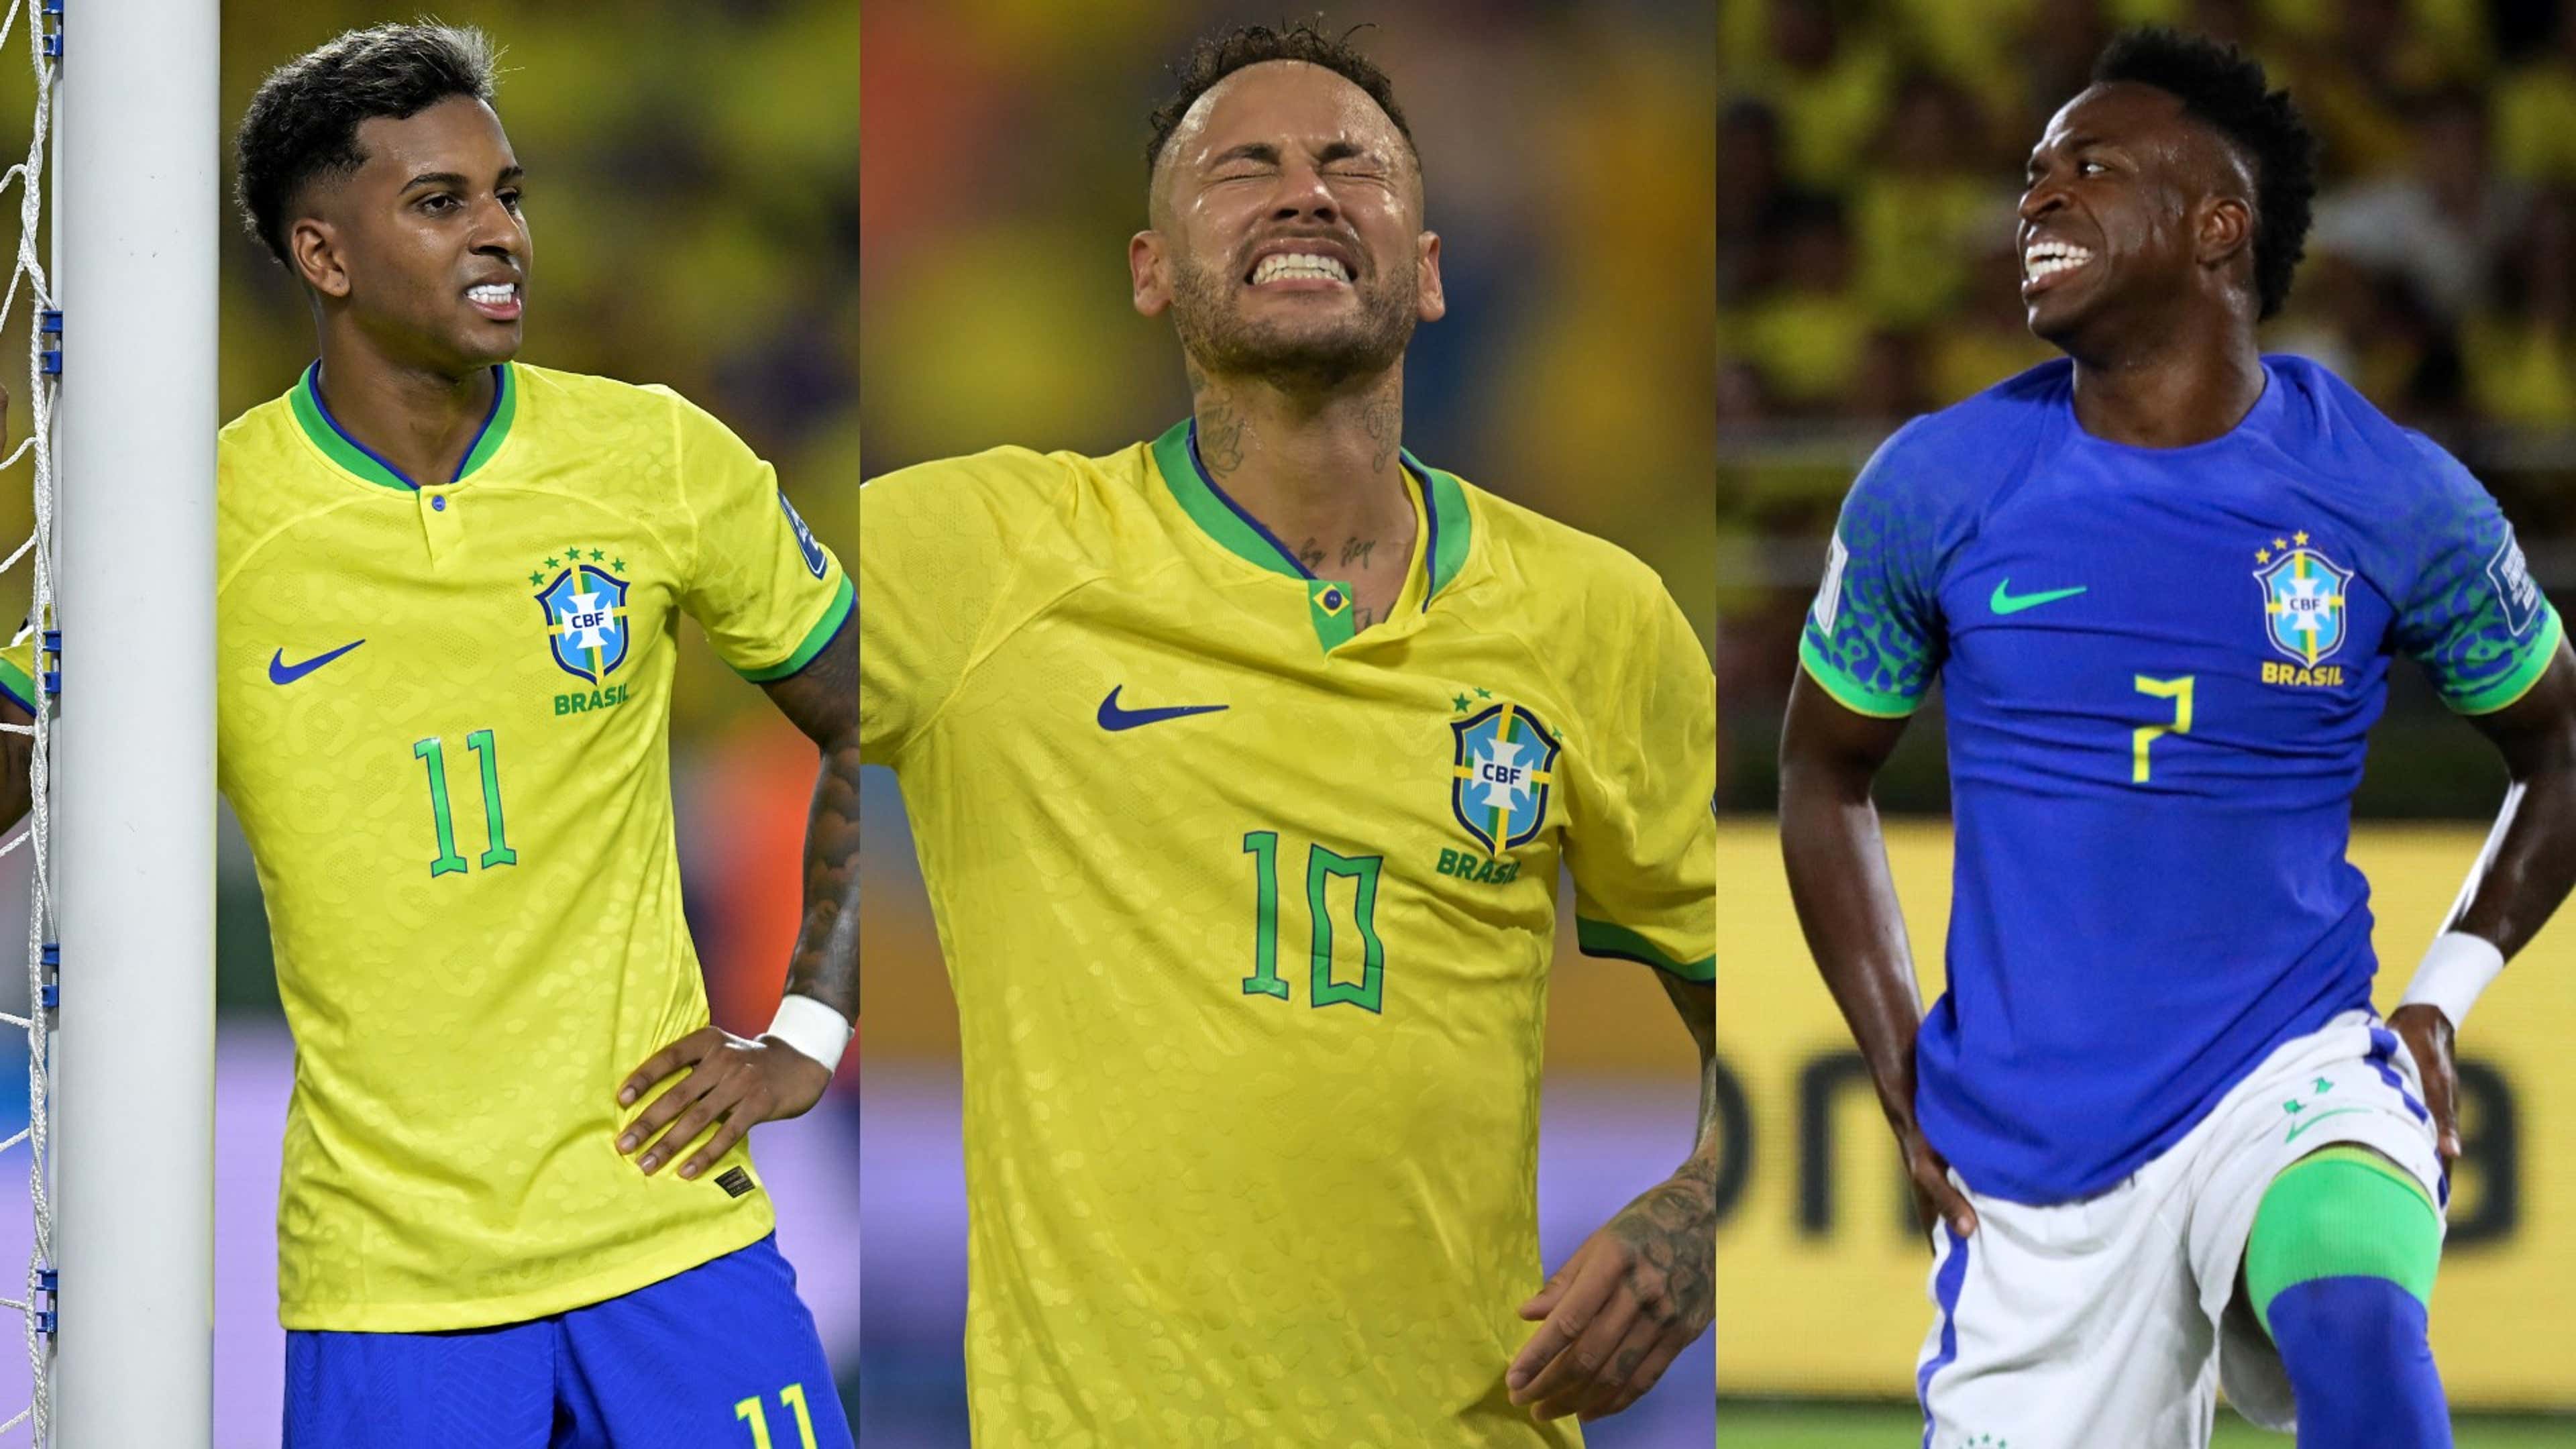 BRAZIL 26 MAN SQUAD FIFA WORLD CUP 2022 QUALIFIERS JANUARY MATCHES